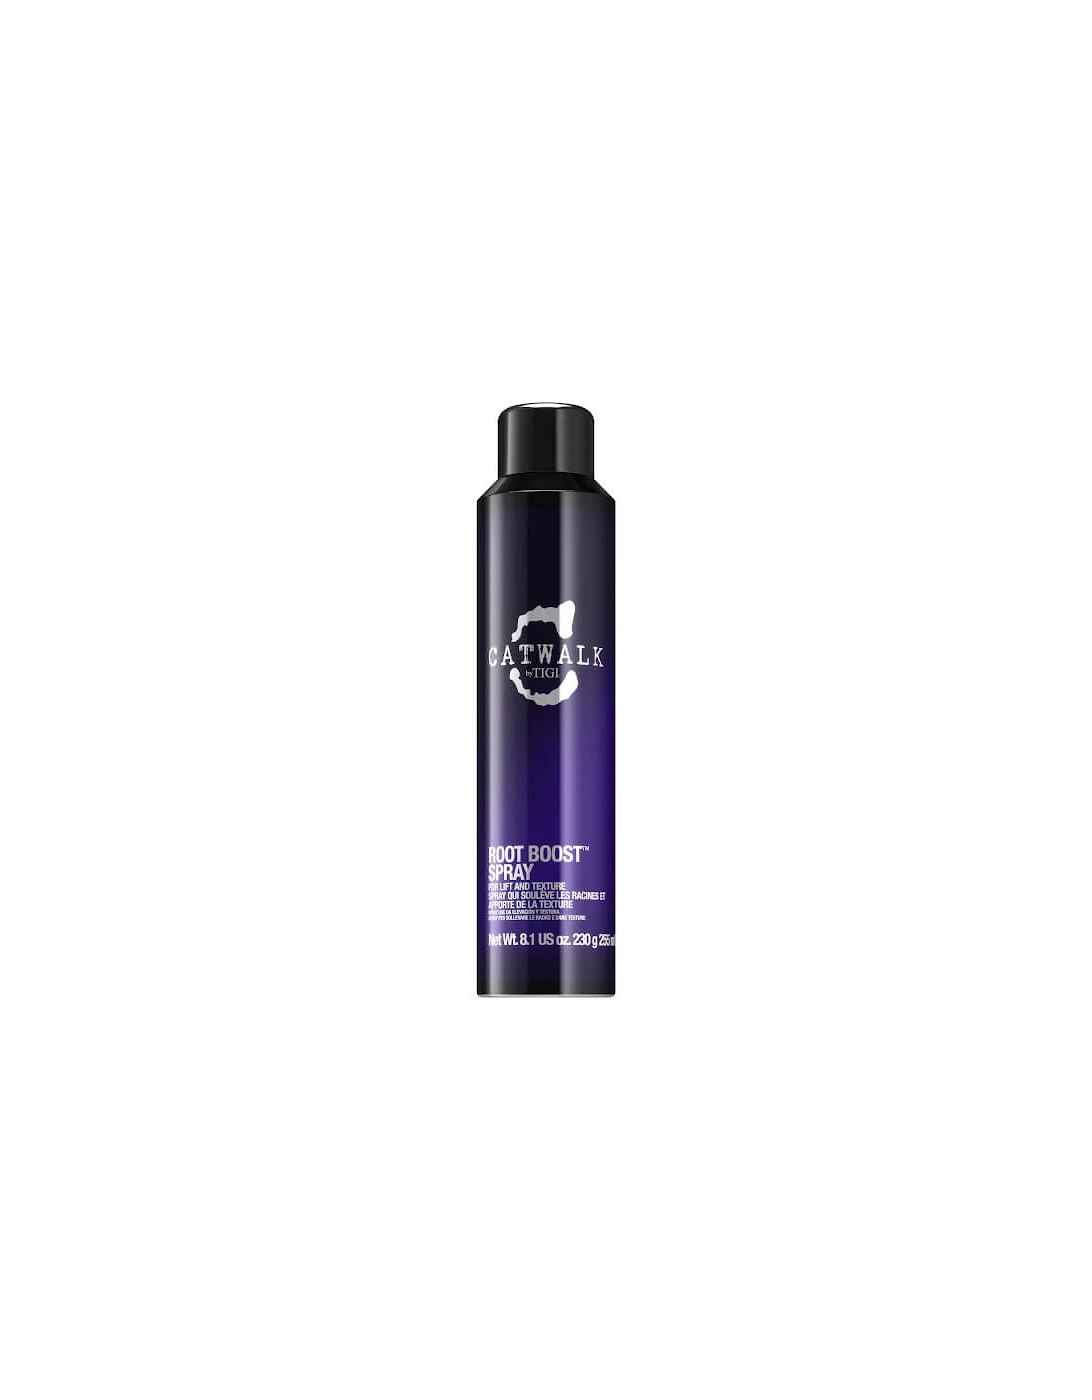 Catwalk Your Highness Root Boost Spray 250ml - - Catwalk Your Highness Root Boost Spray 250ml - Gill, 2 of 1